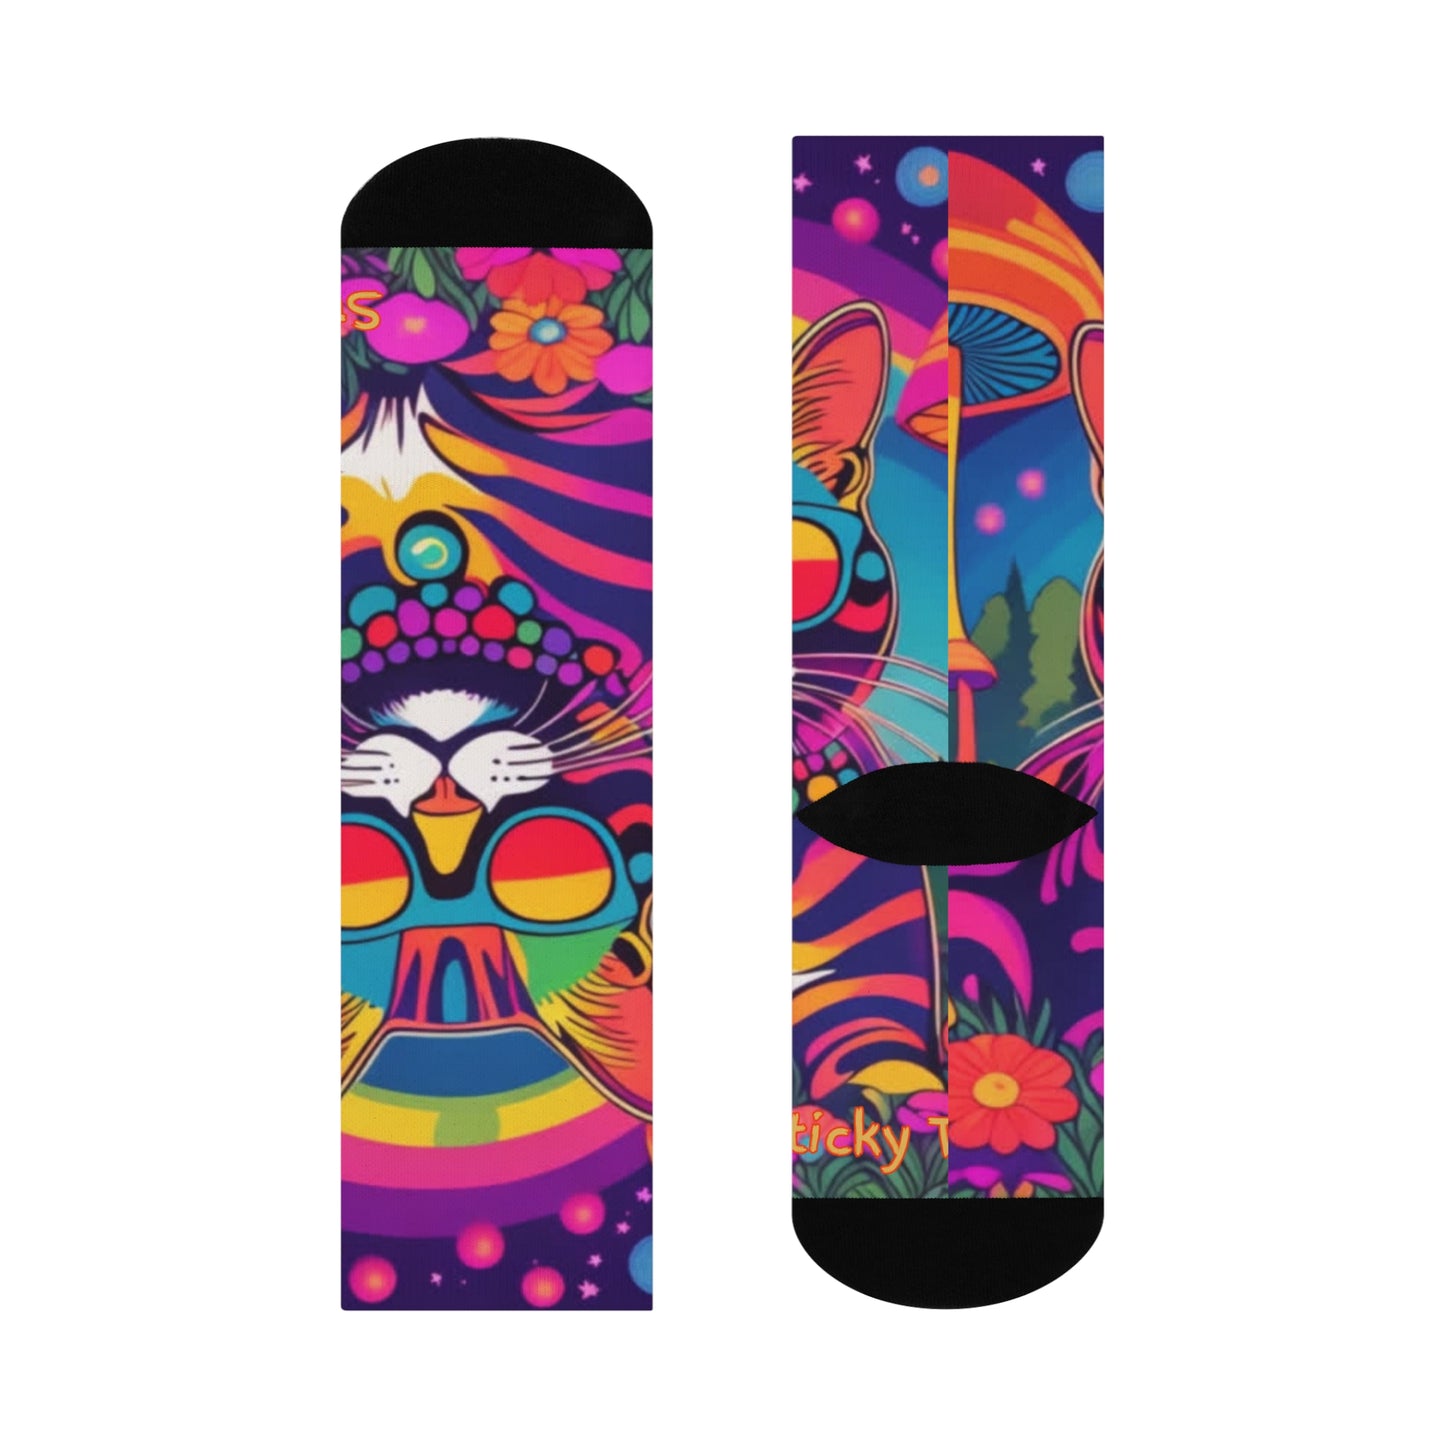 Psychedelic Sticky - SUPER COMFY Cushioned Crew Socks